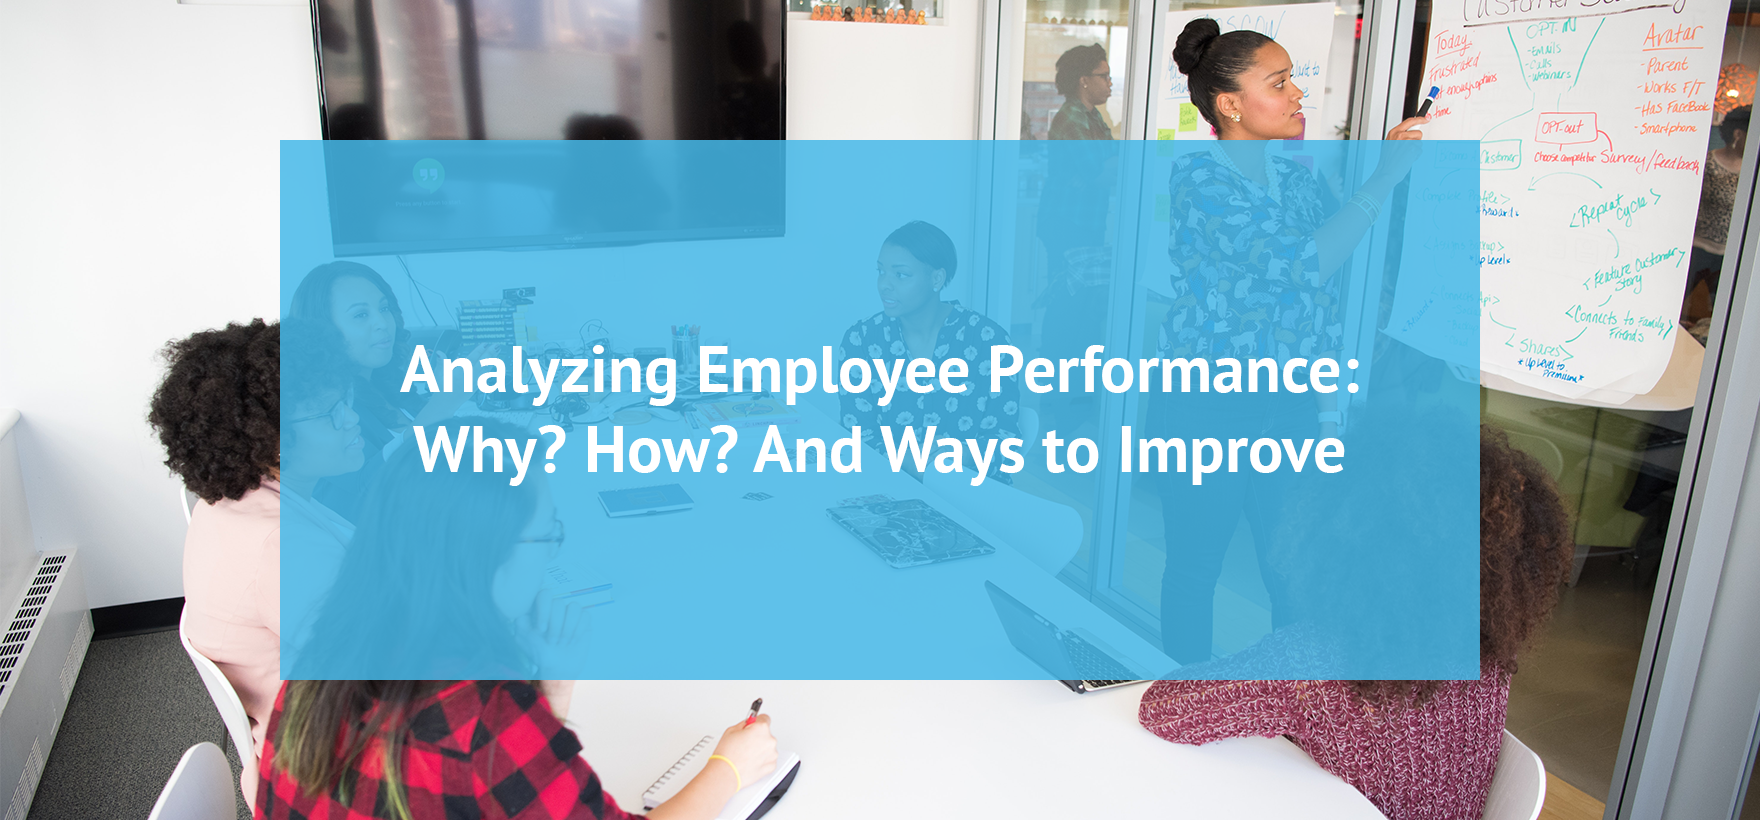 Analyzing Employee Performance: Why? How? And Ways to Improve